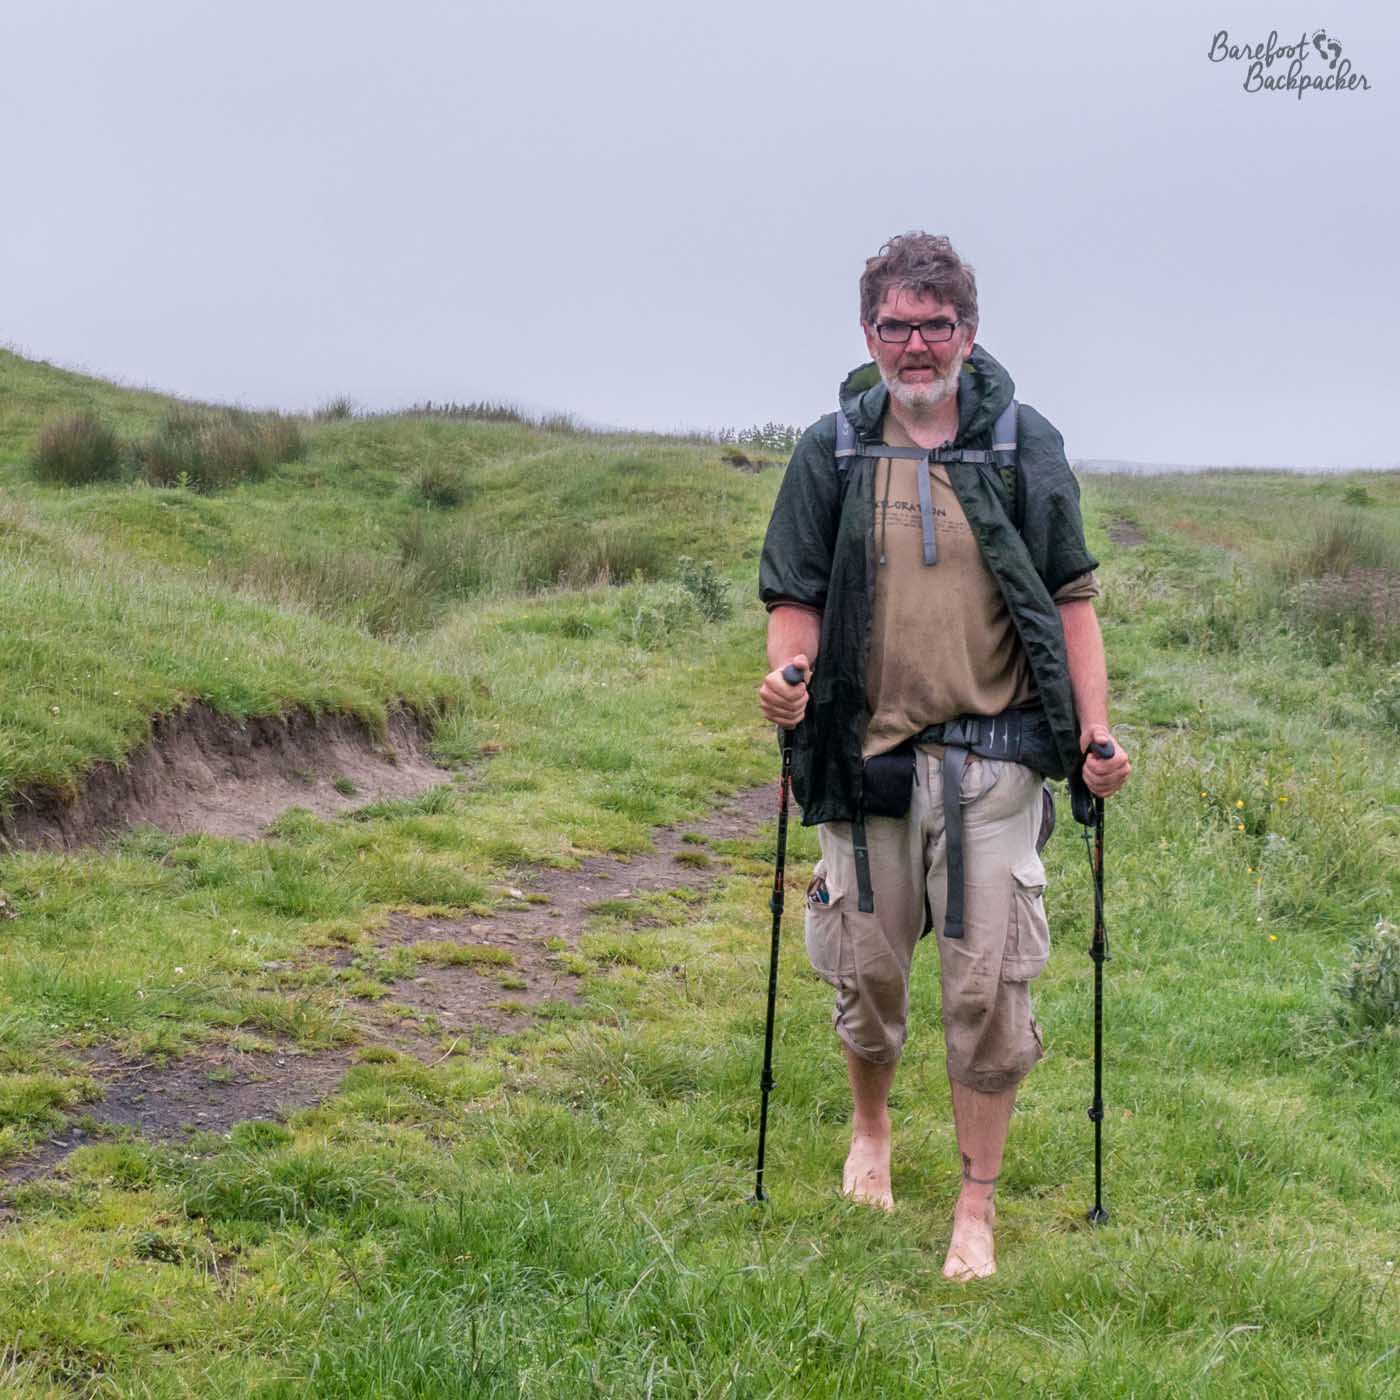 Someone is hiking towards the camera through a vague path in the moorlands. They are carrying a large backpack, hiking poles, and are barefoot. They also look very grumpy